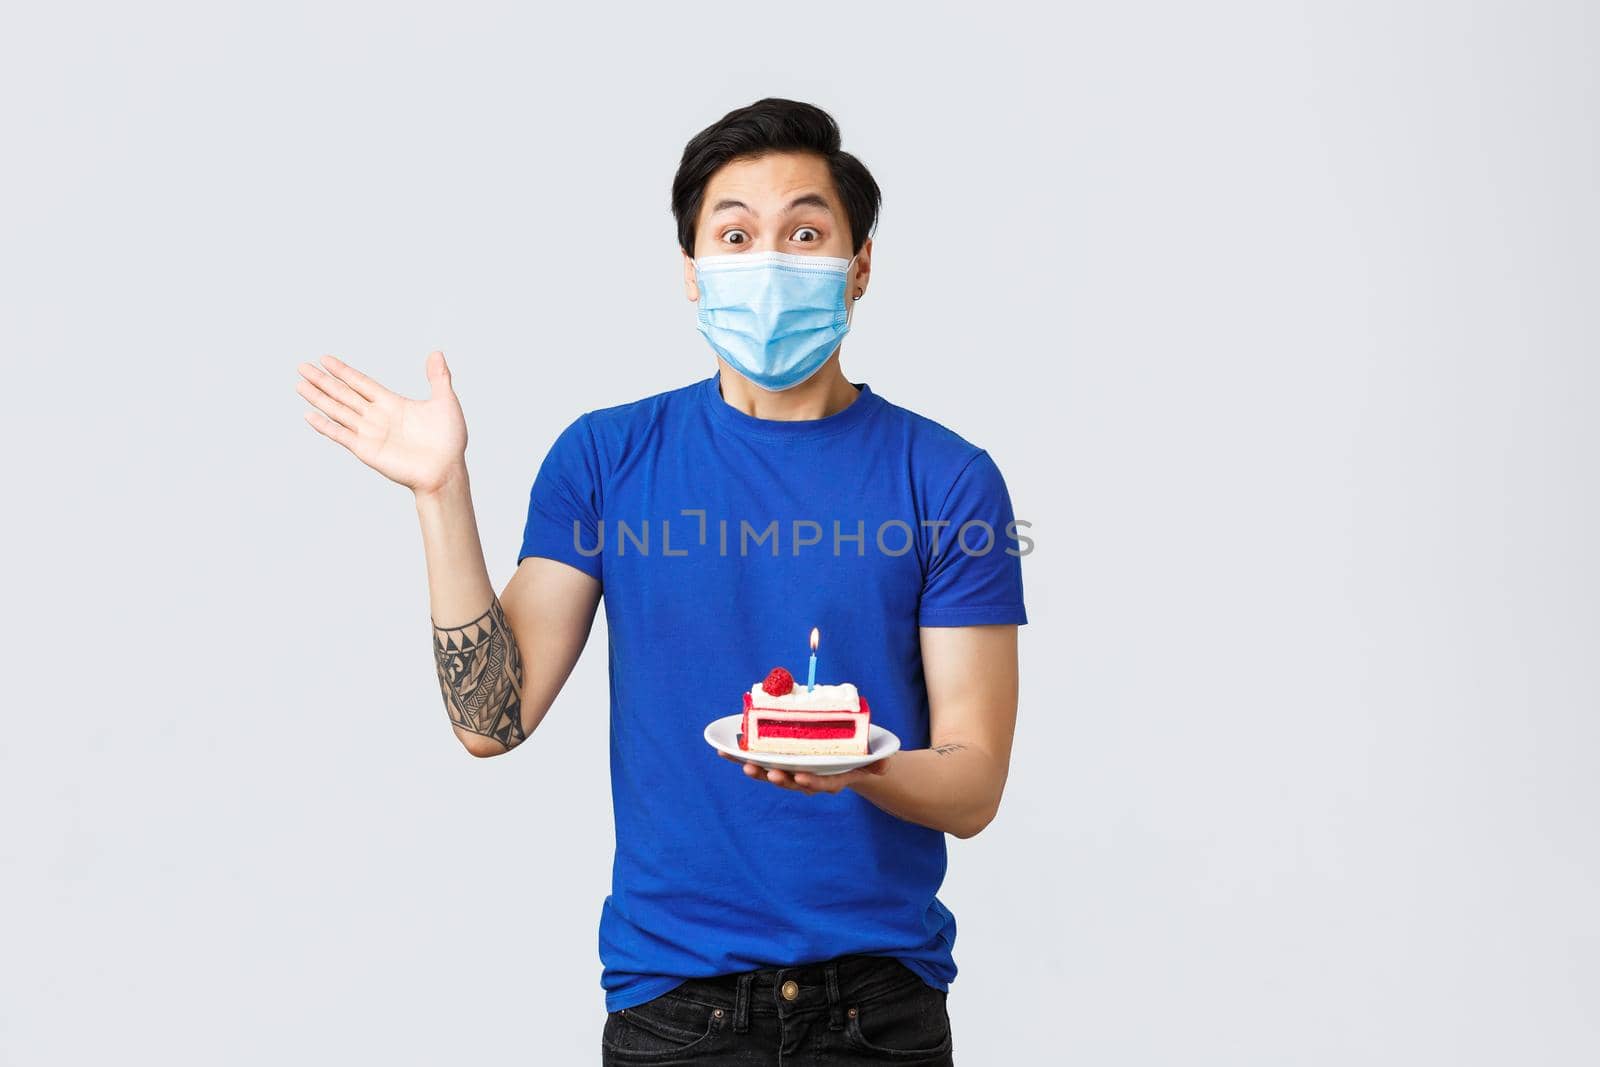 Self-quarantine, home lifestyle and celebration concept. Excited young man celebrating birthday, asian guy in medical mask waving hand and holding b-day cake, staring astonished.